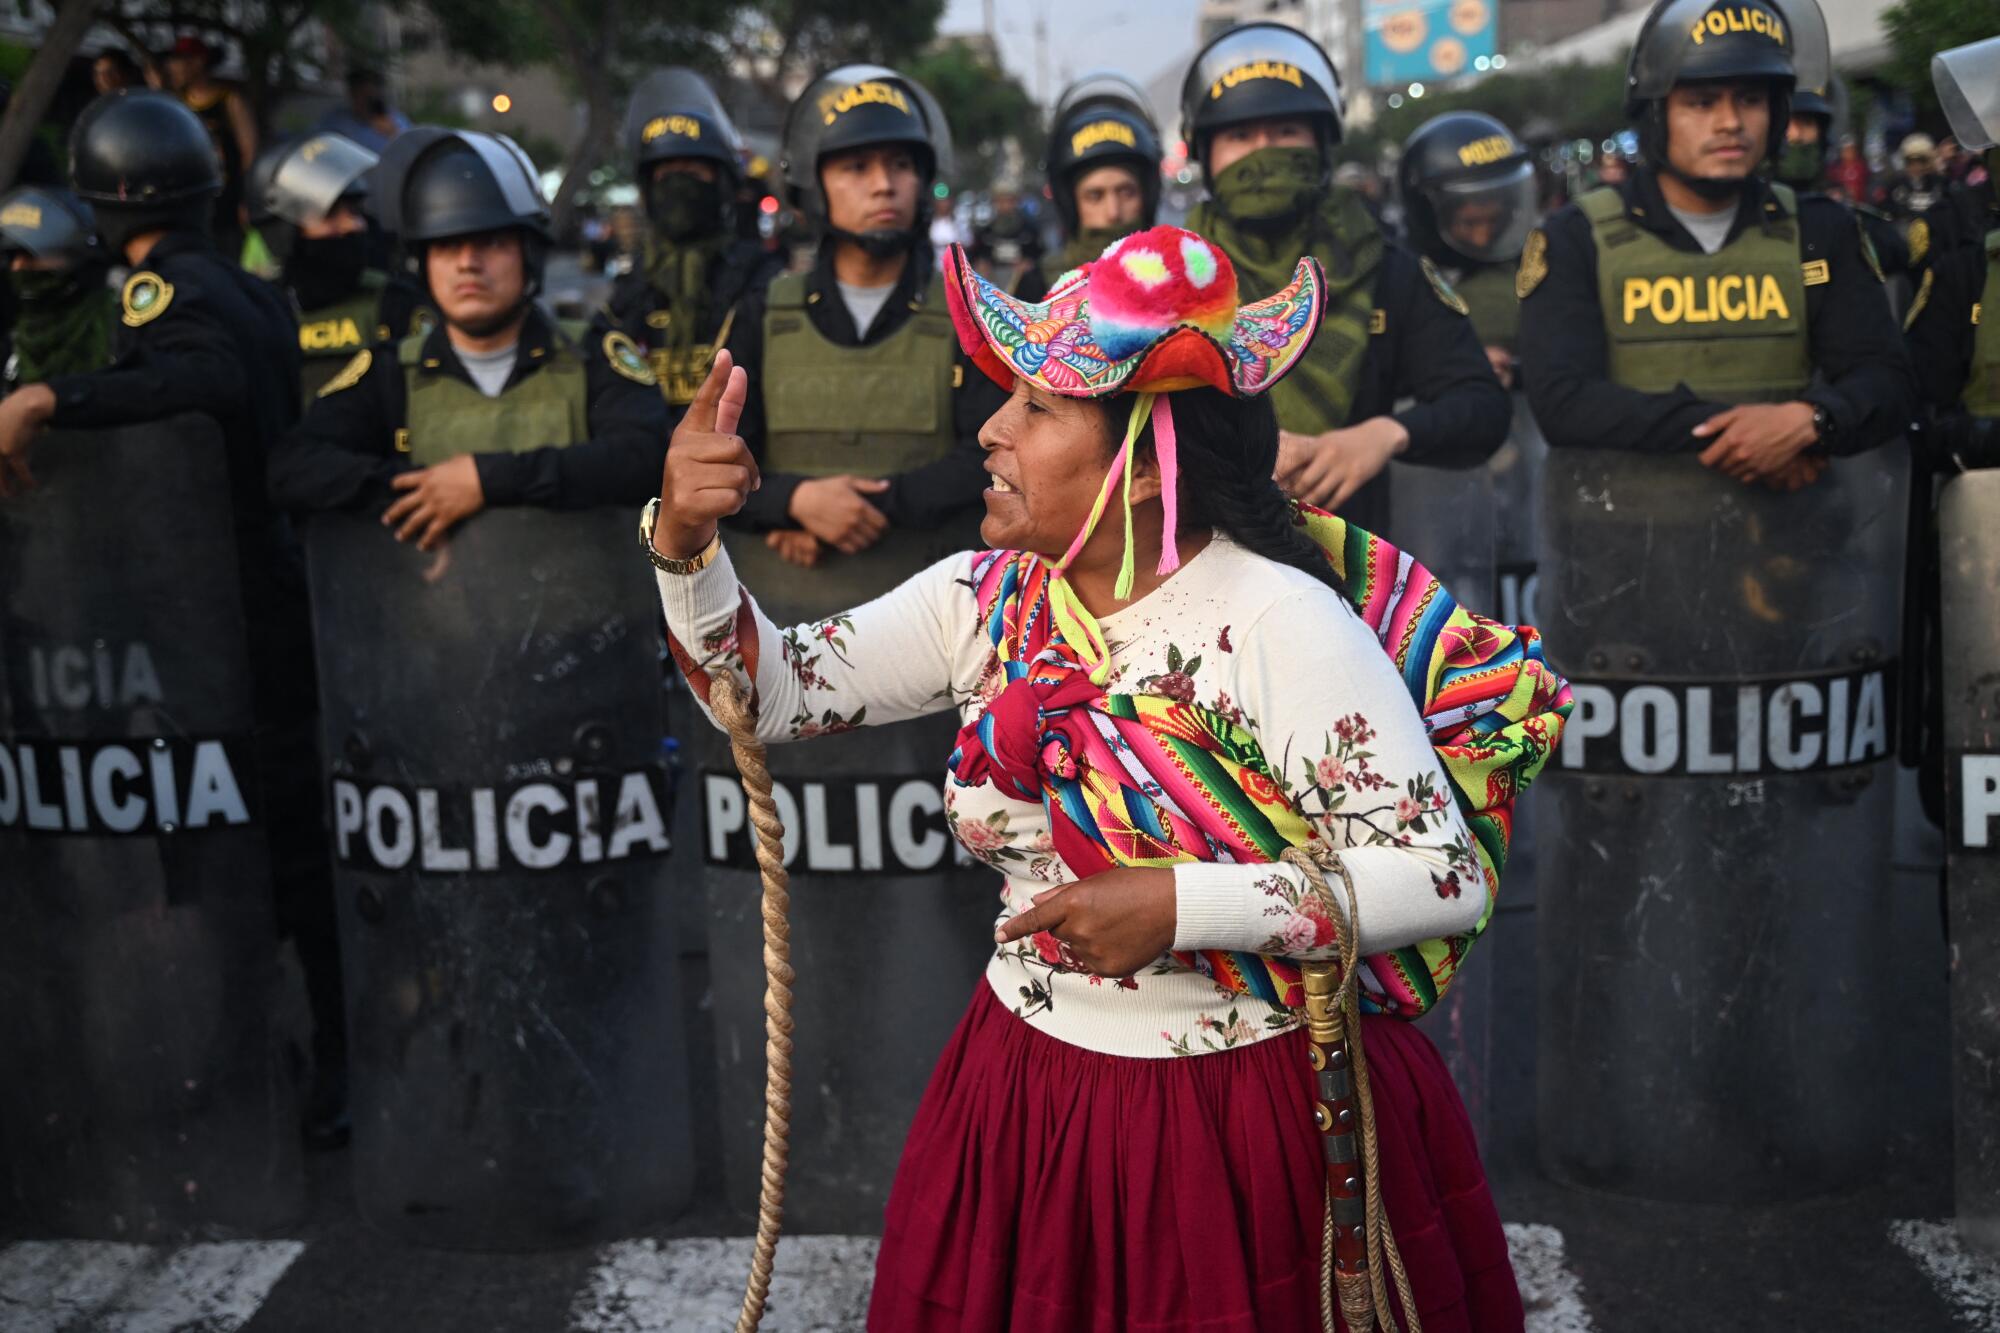 A protester gestures in front of police.